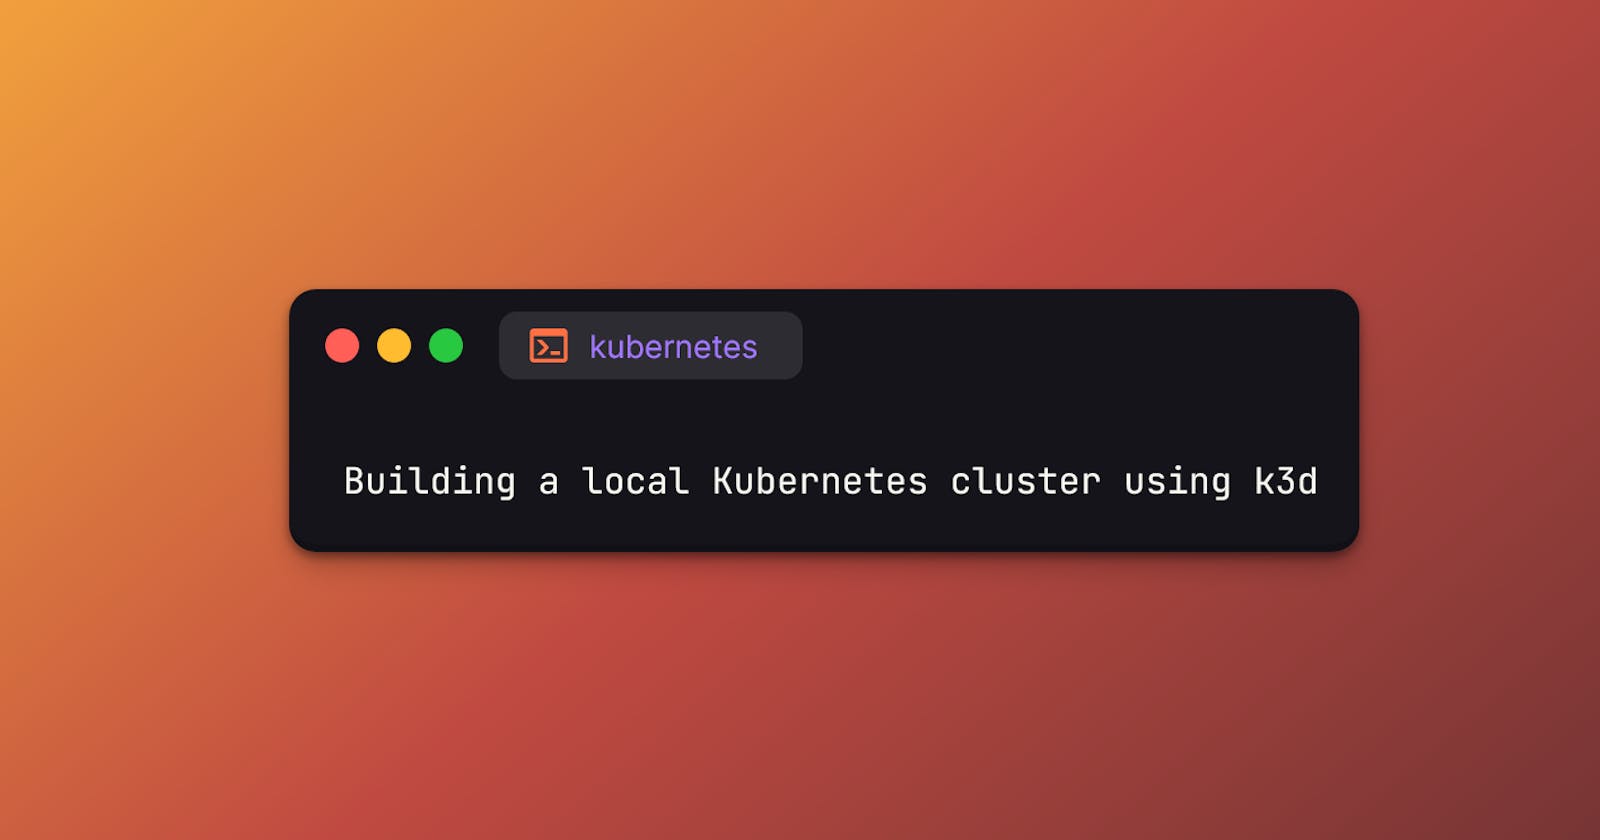 Building a local Kubernetes cluster using k3d